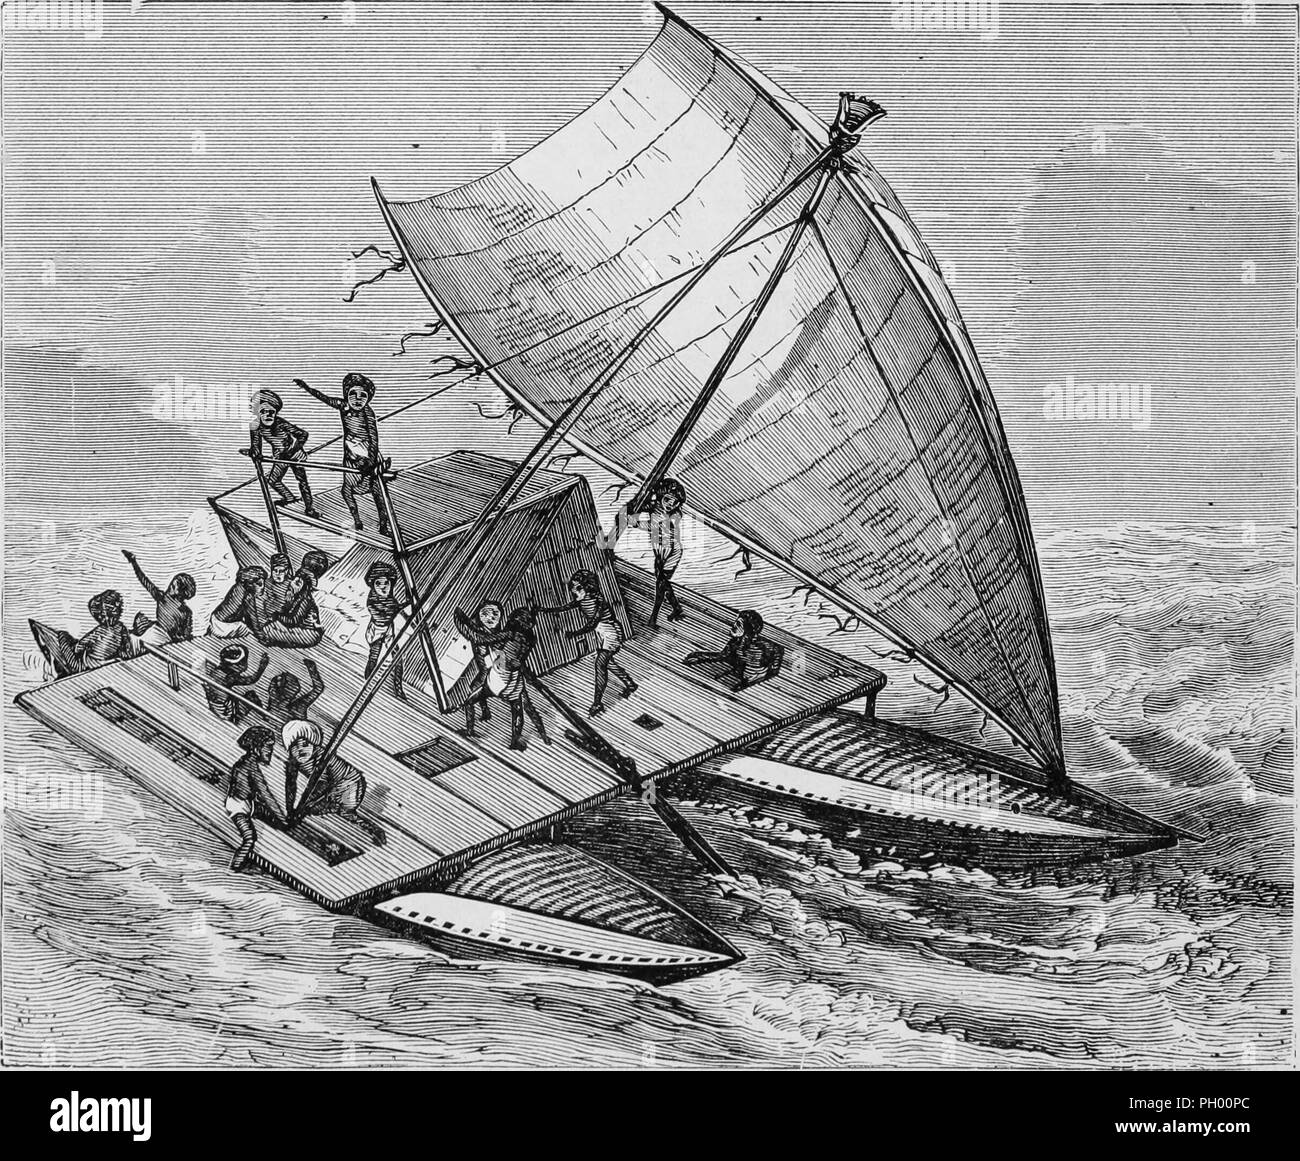 Black and white vintage print, depicting a Fijian double canoe or catamaran, with a lateen rigged sail, hatches for entry into each canoe hull, and several men on deck, published in John George Wood's volume 'The uncivilized races of men in all countries of the world, being a comprehensive account of their manners and customs, and of their physical, social, mental, moral and religious characteristics', 1877. Courtesy Internet Archive. () Stock Photo